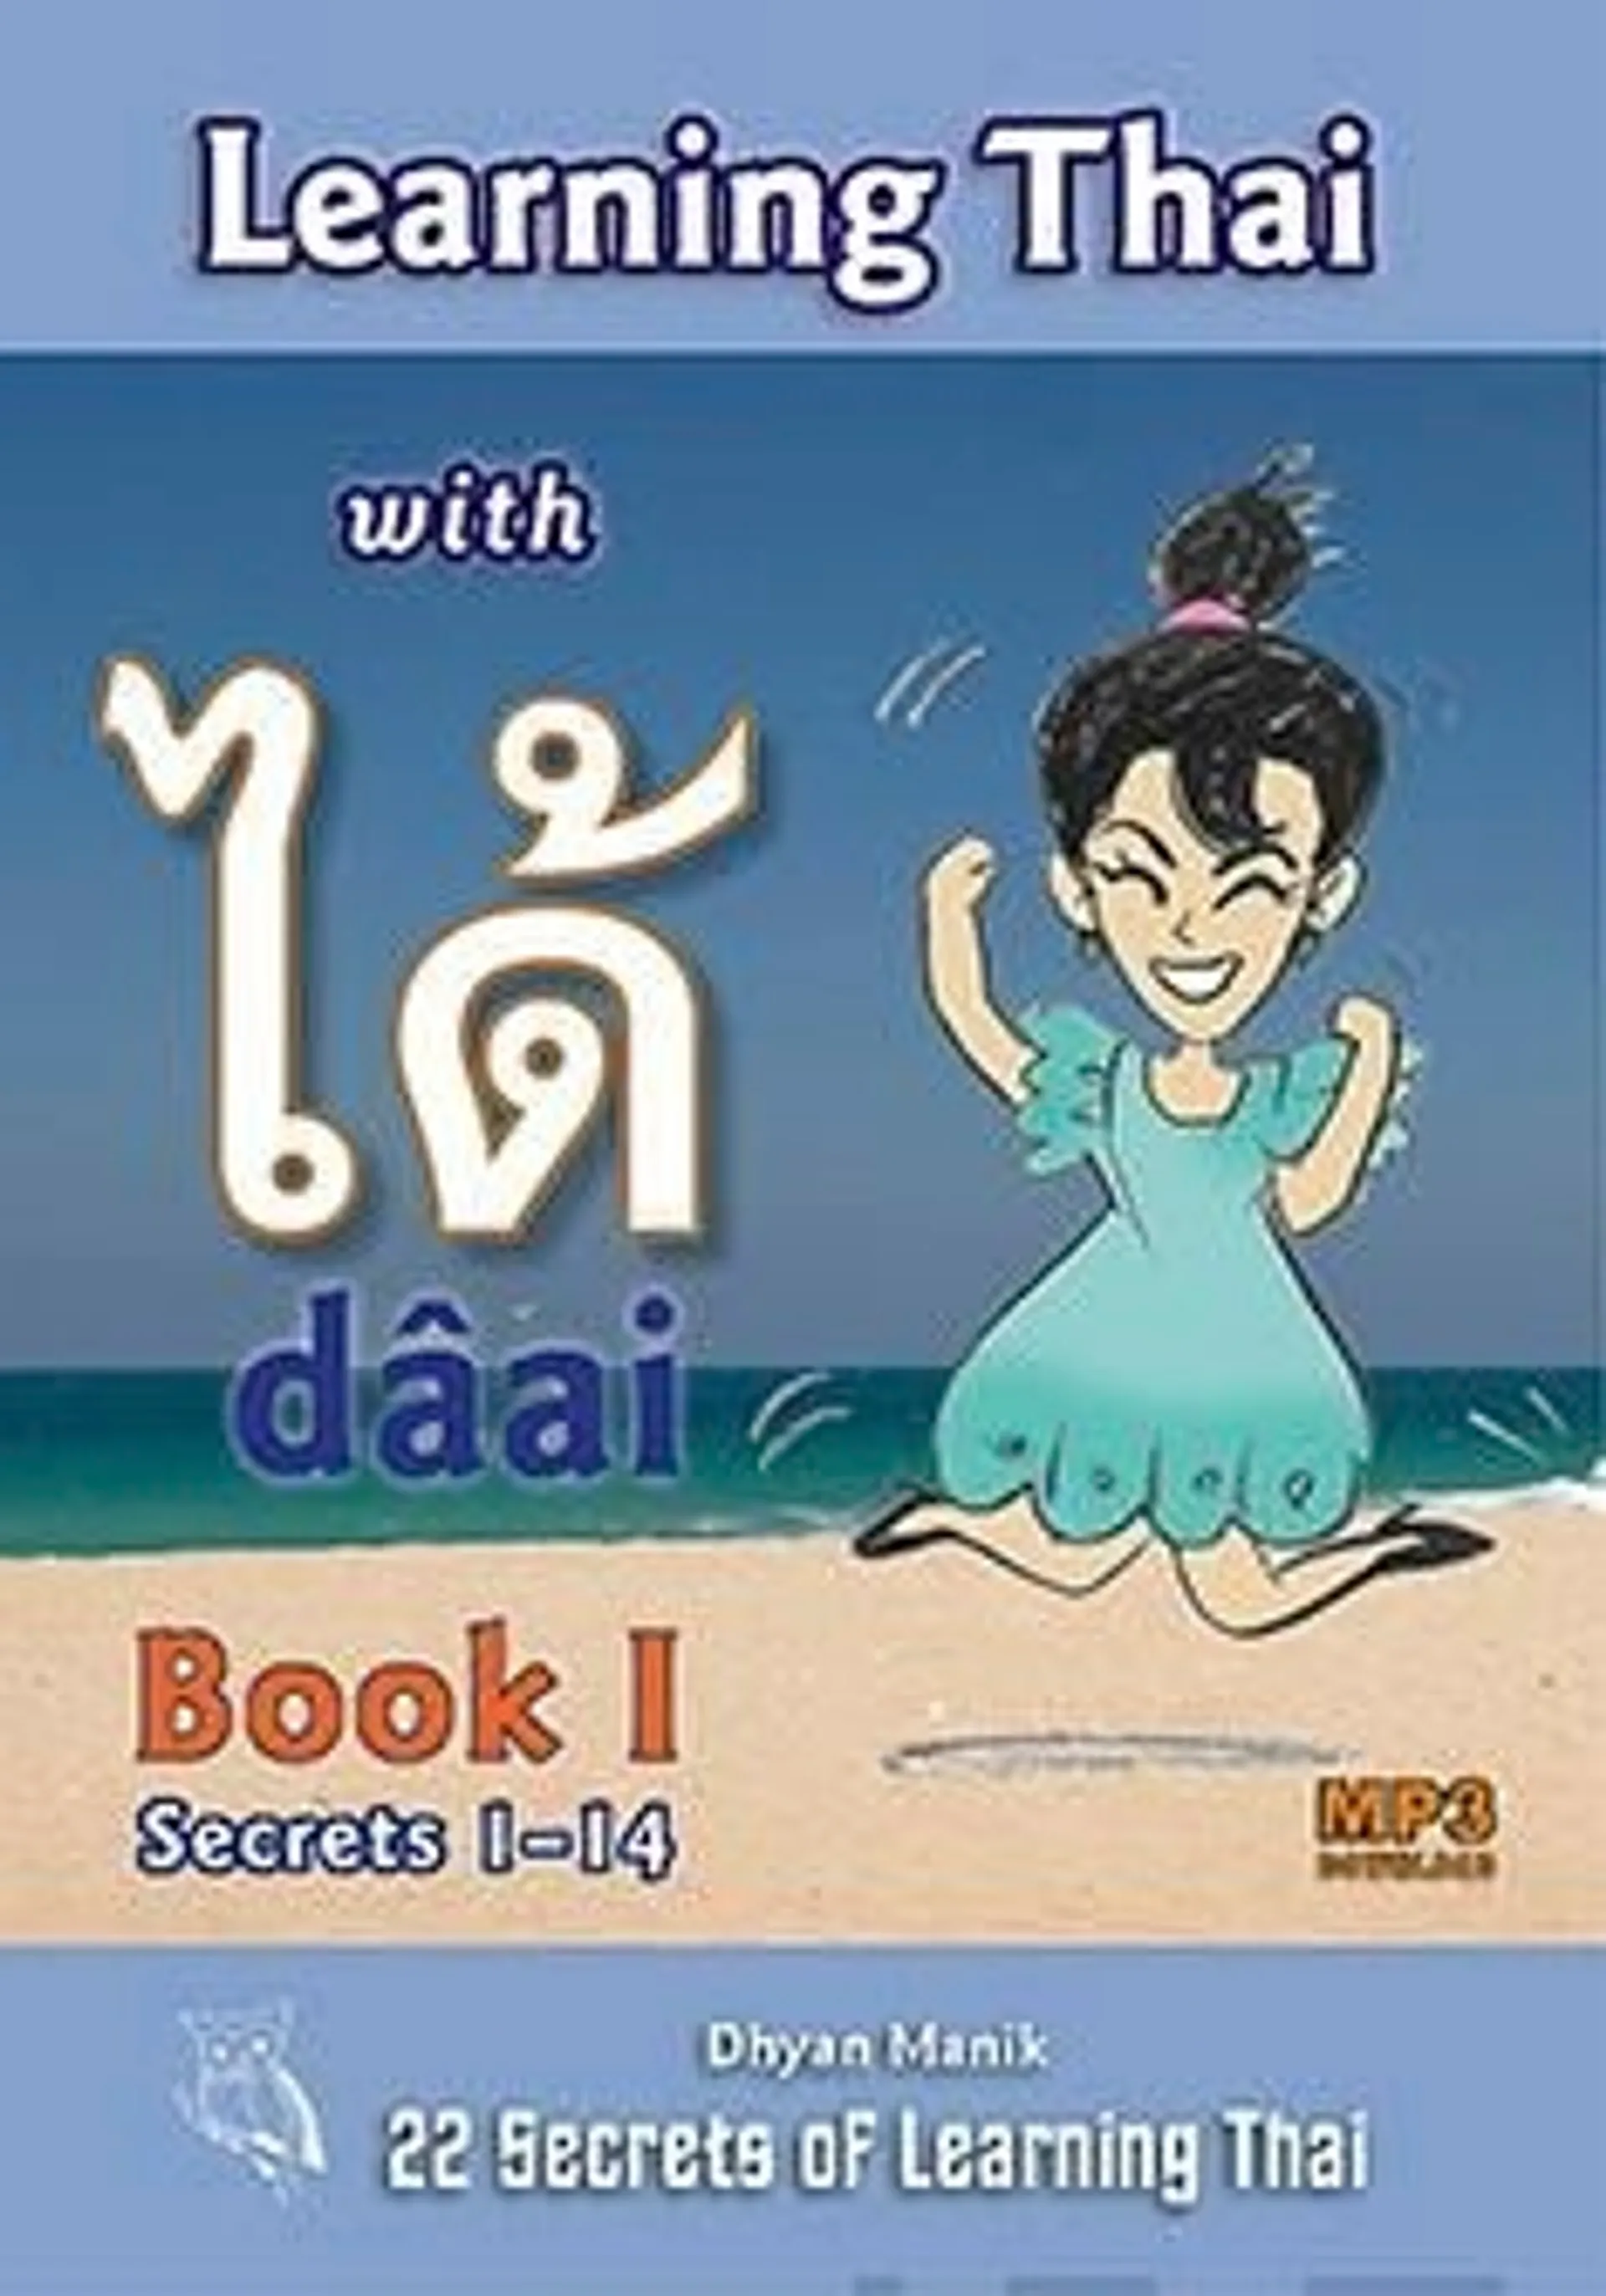 Dhyan, Learning Thai with dâai - Book I (+MP3 download)